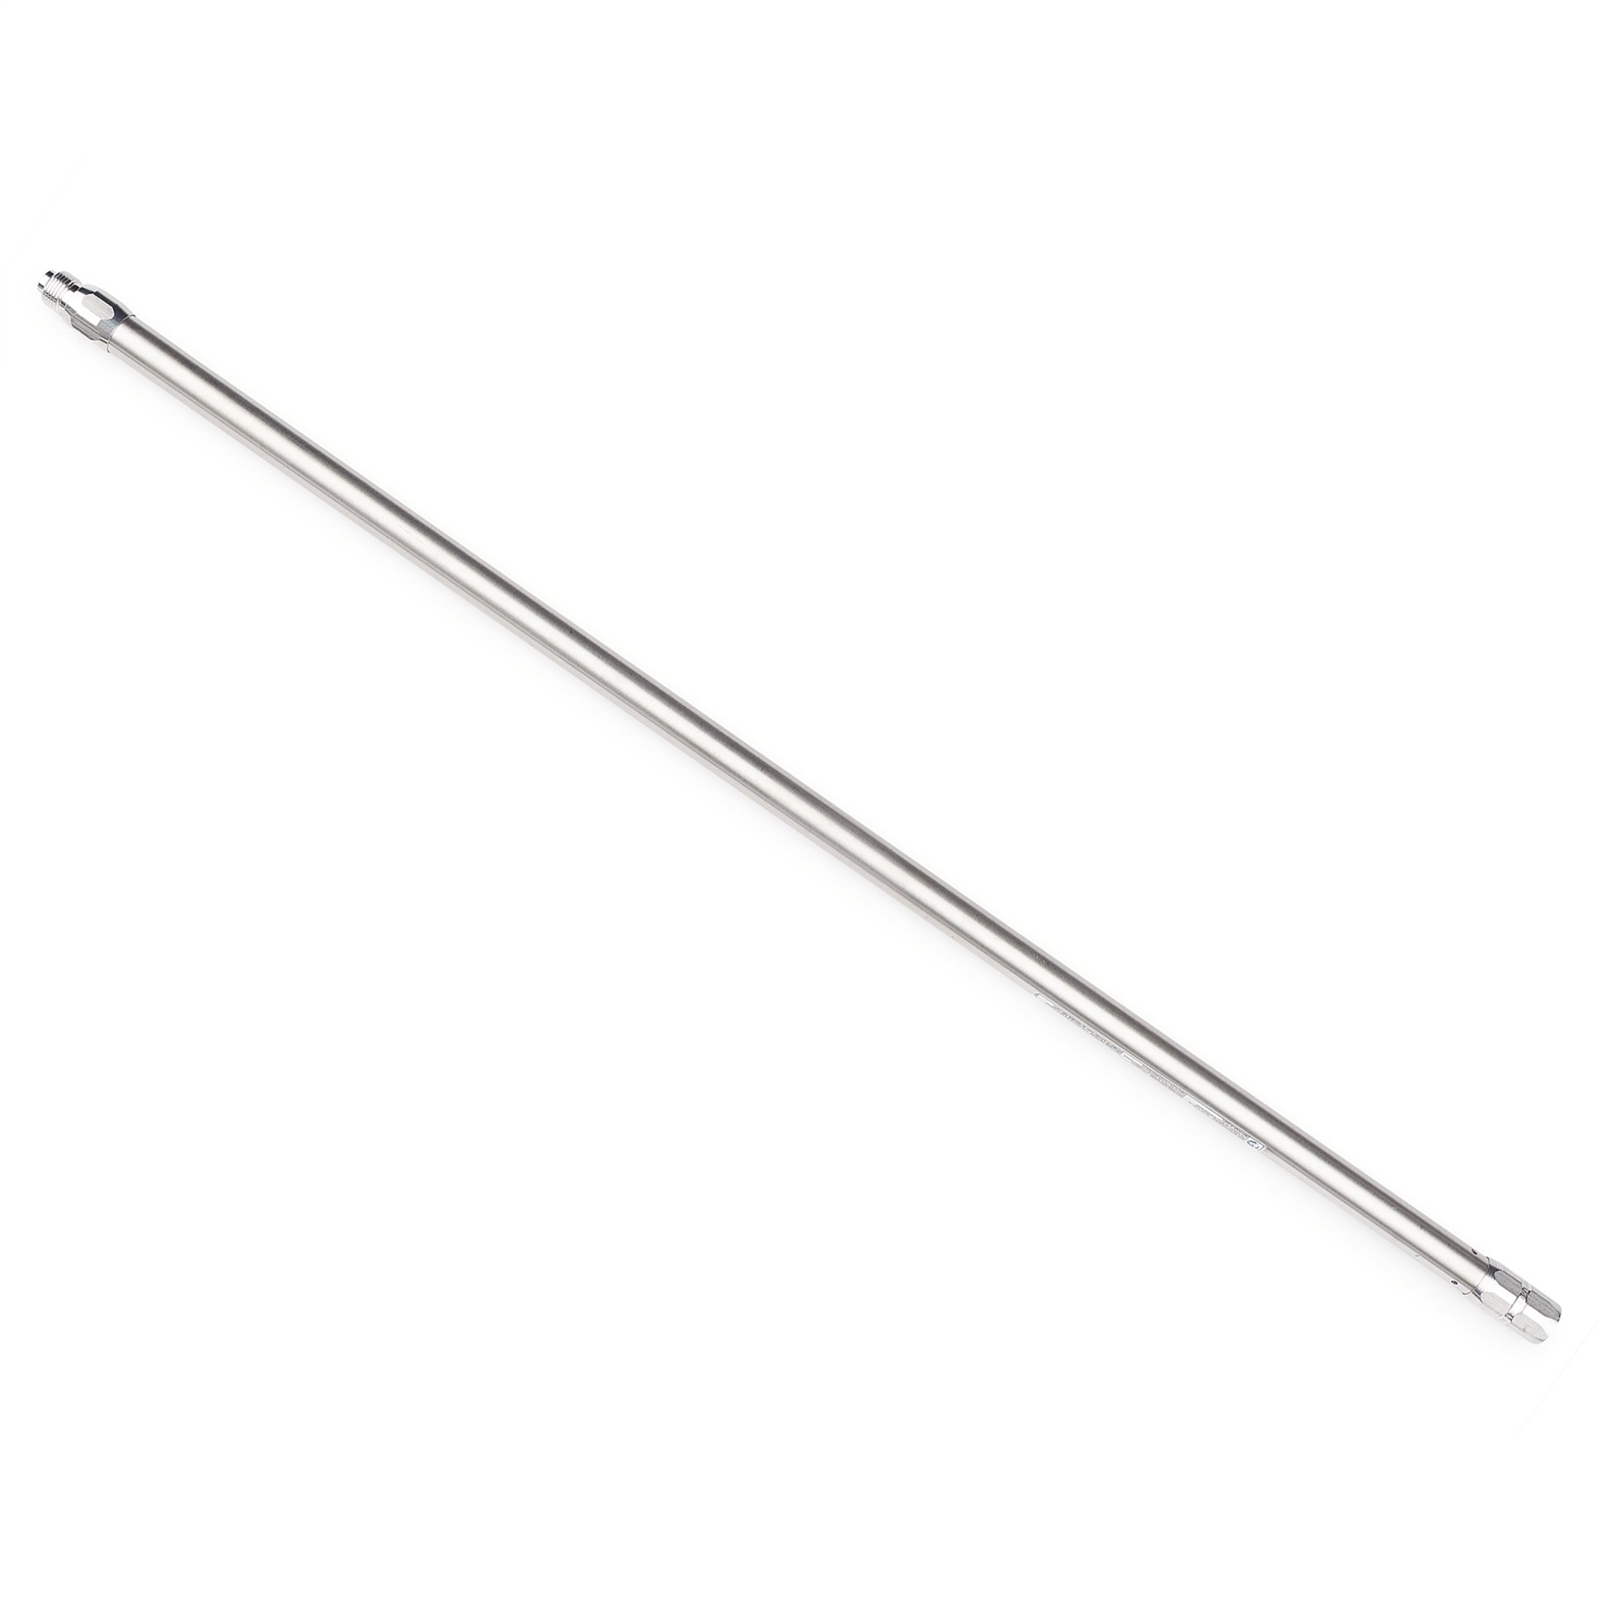 GRACO 243042 Tip Extension,20 in. 